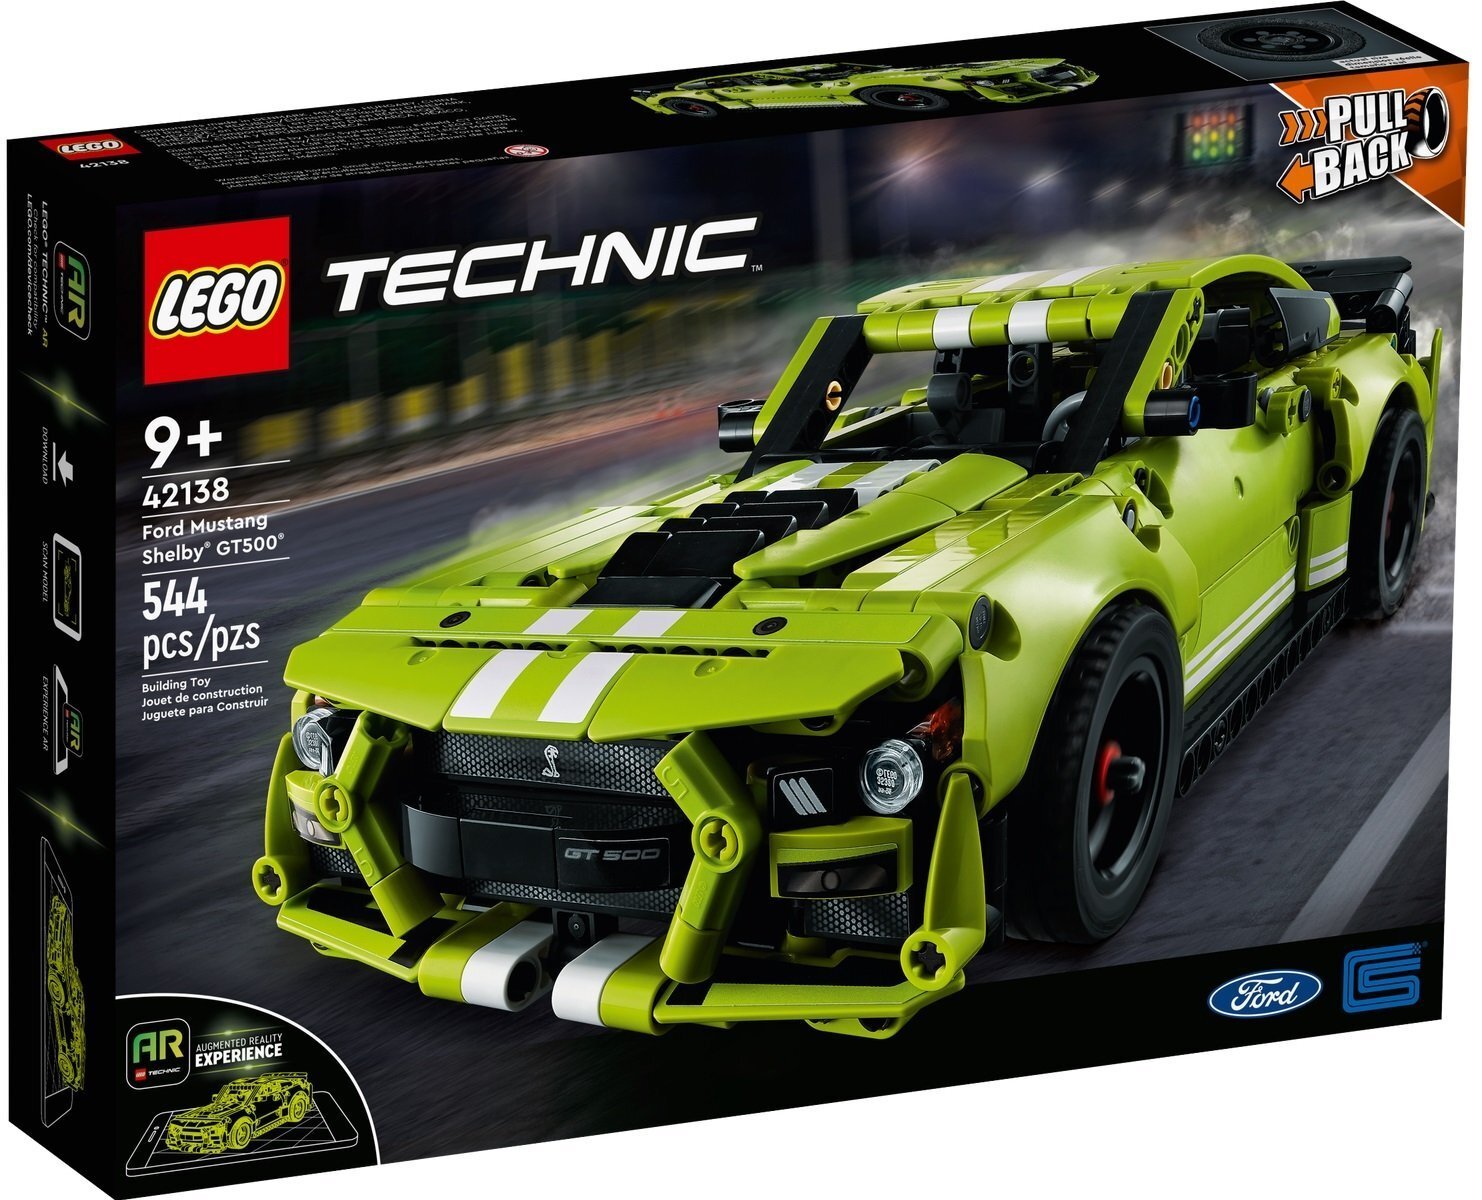 LEGO 42138 Technic Ford Mustang Shelby GT фото 1